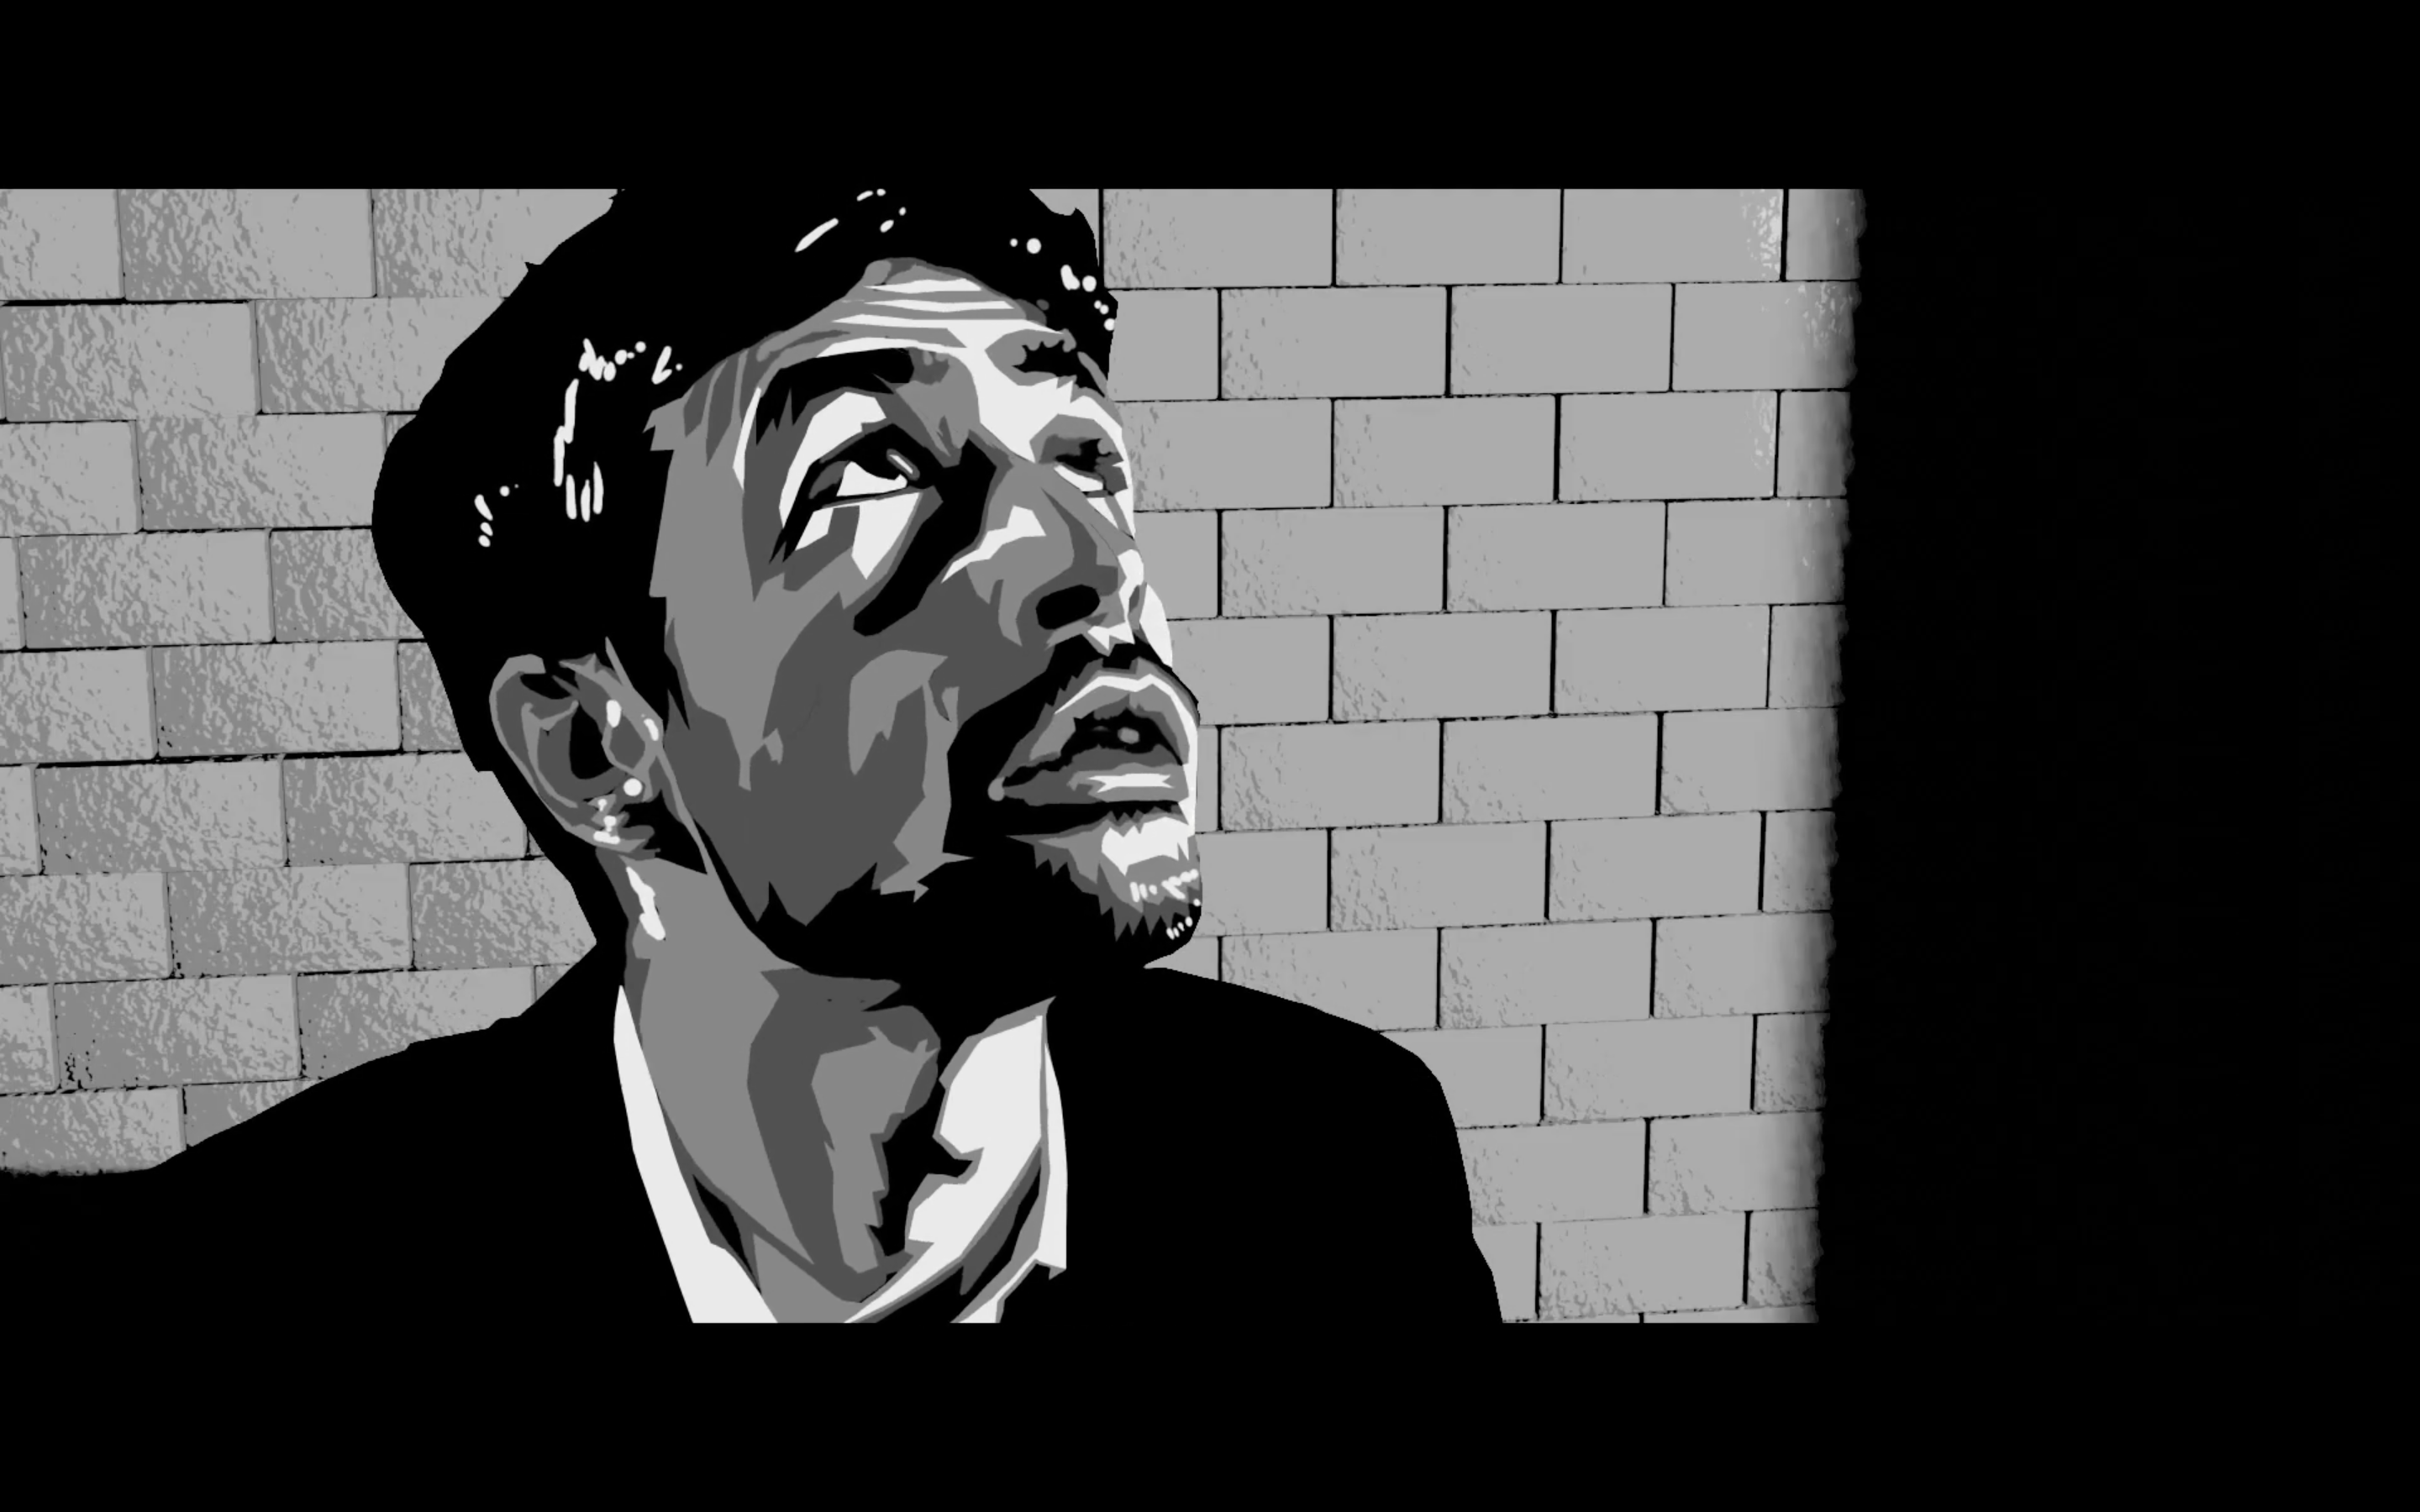 A black and white animated still from No Reprieve featuring my rotoscoped acting to create an animated look for the character.